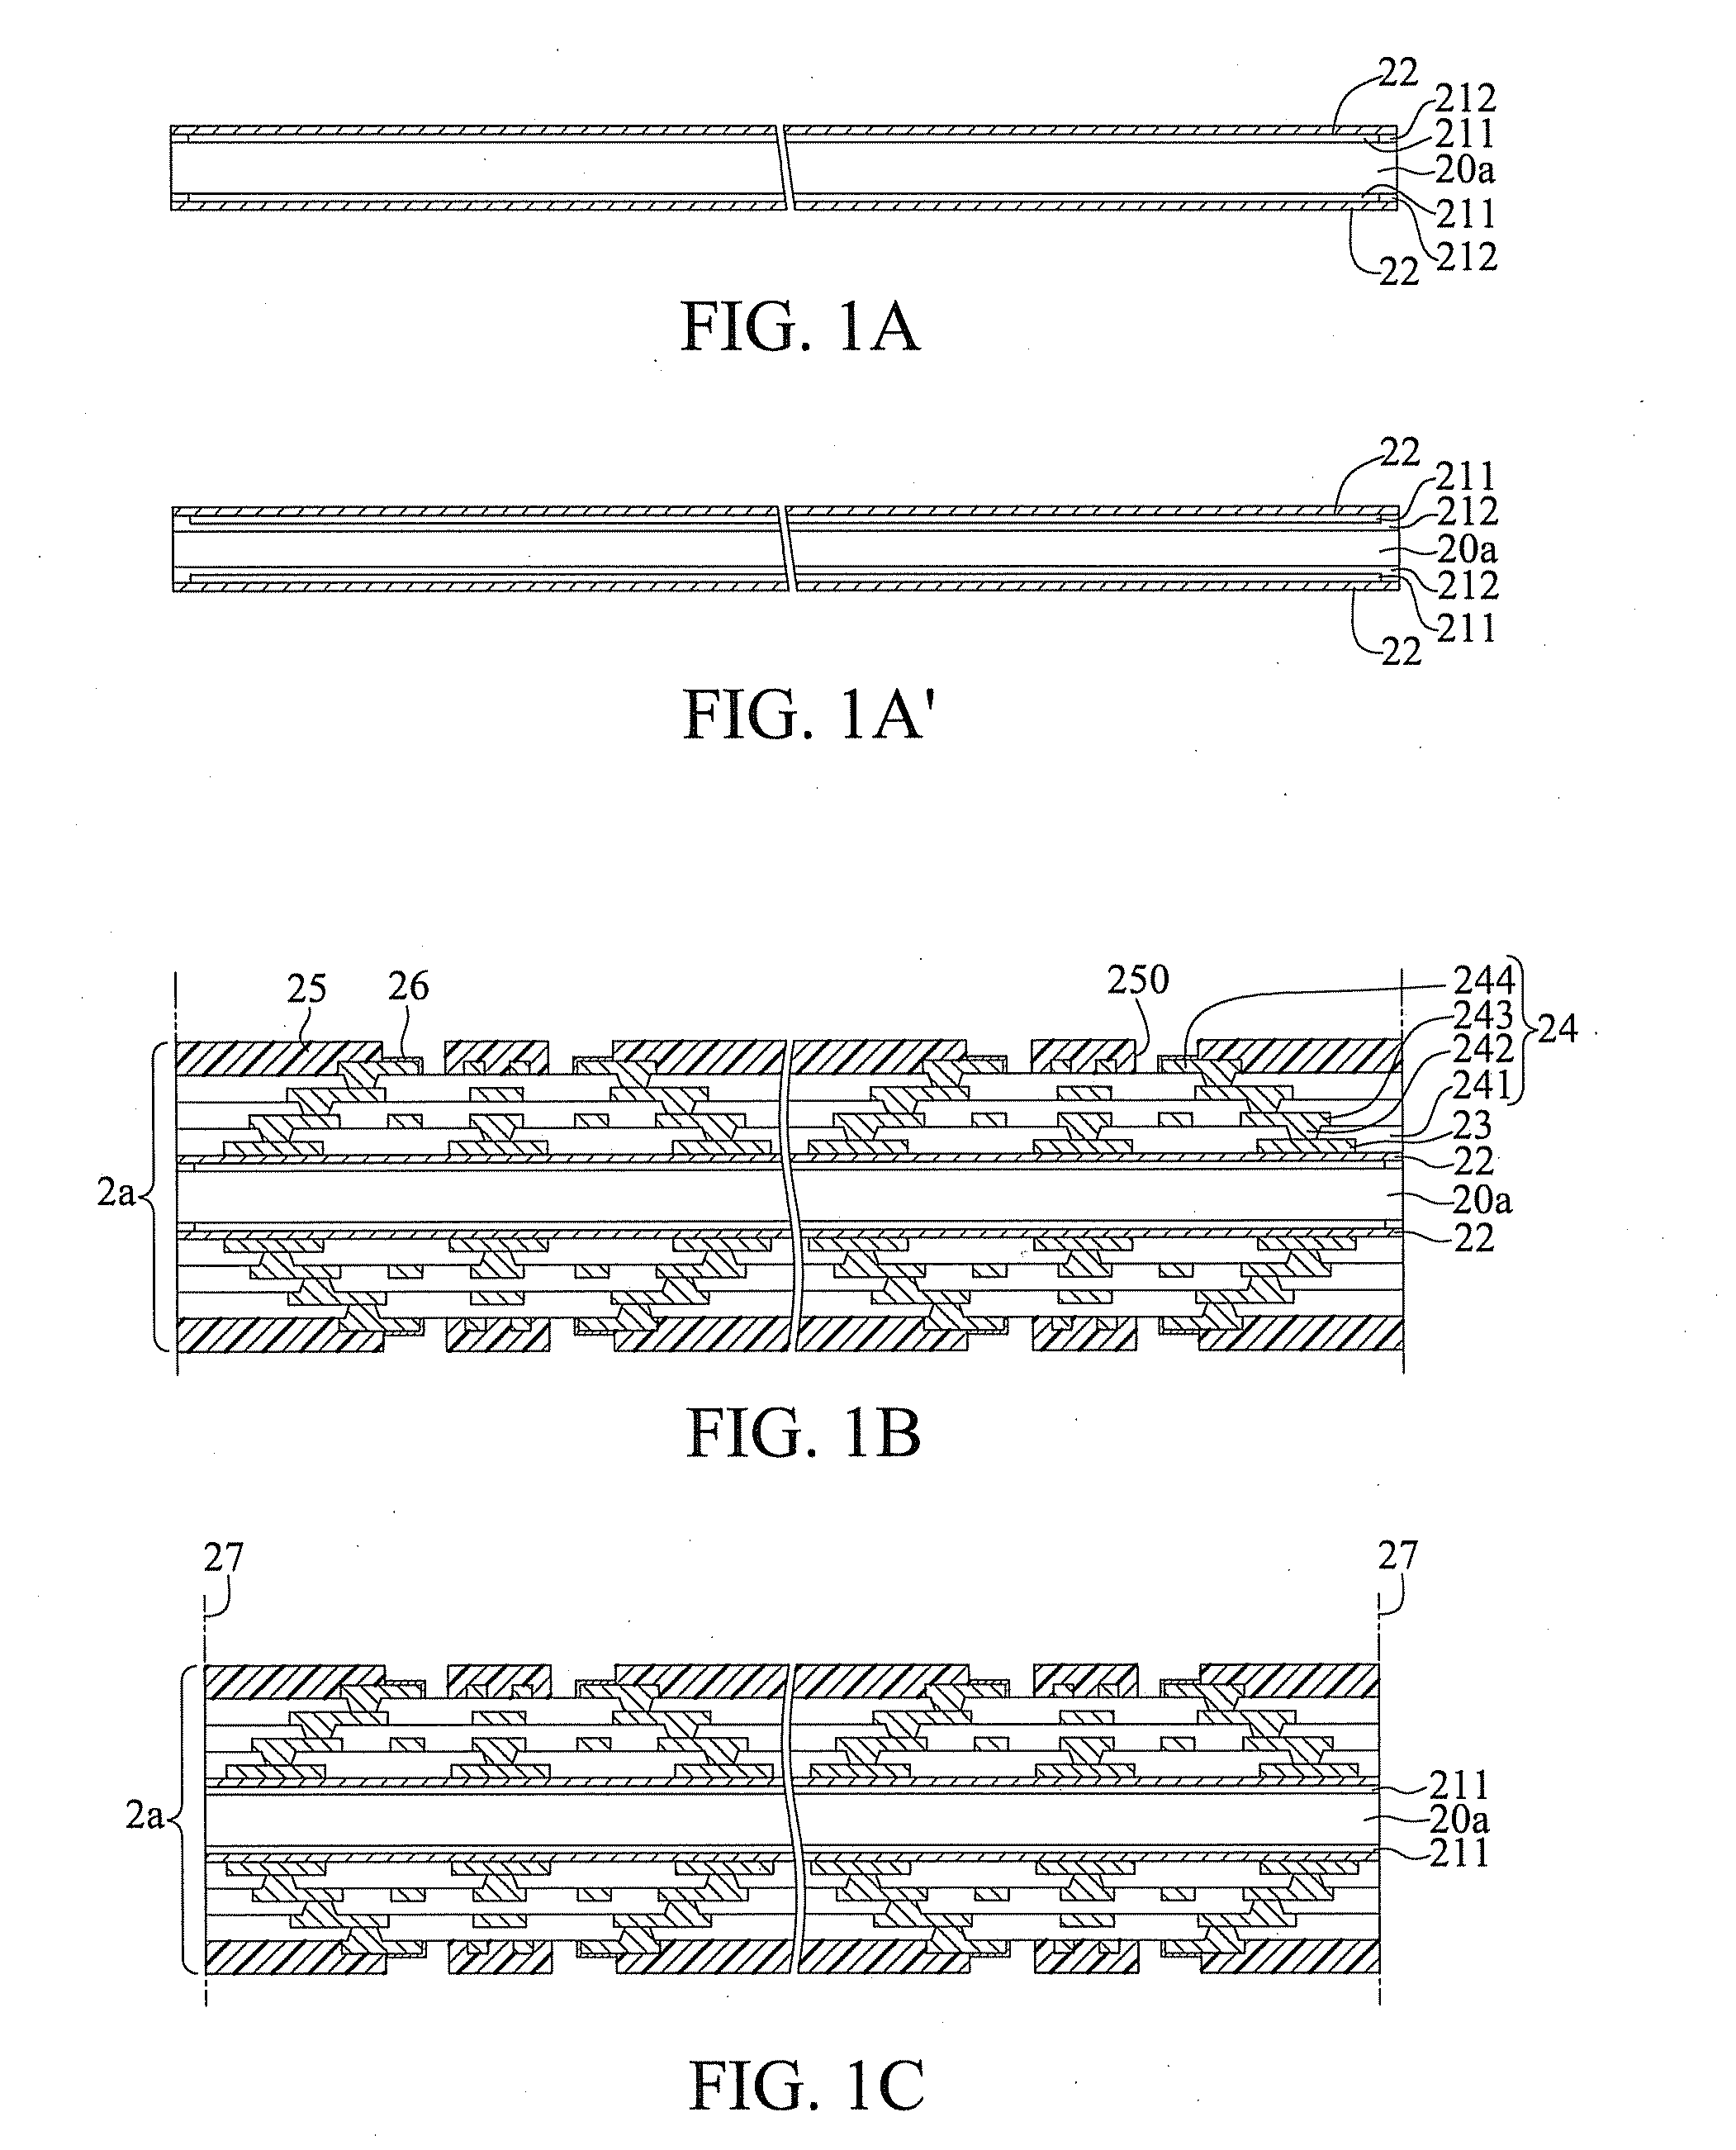 Method of fabricating a package structure